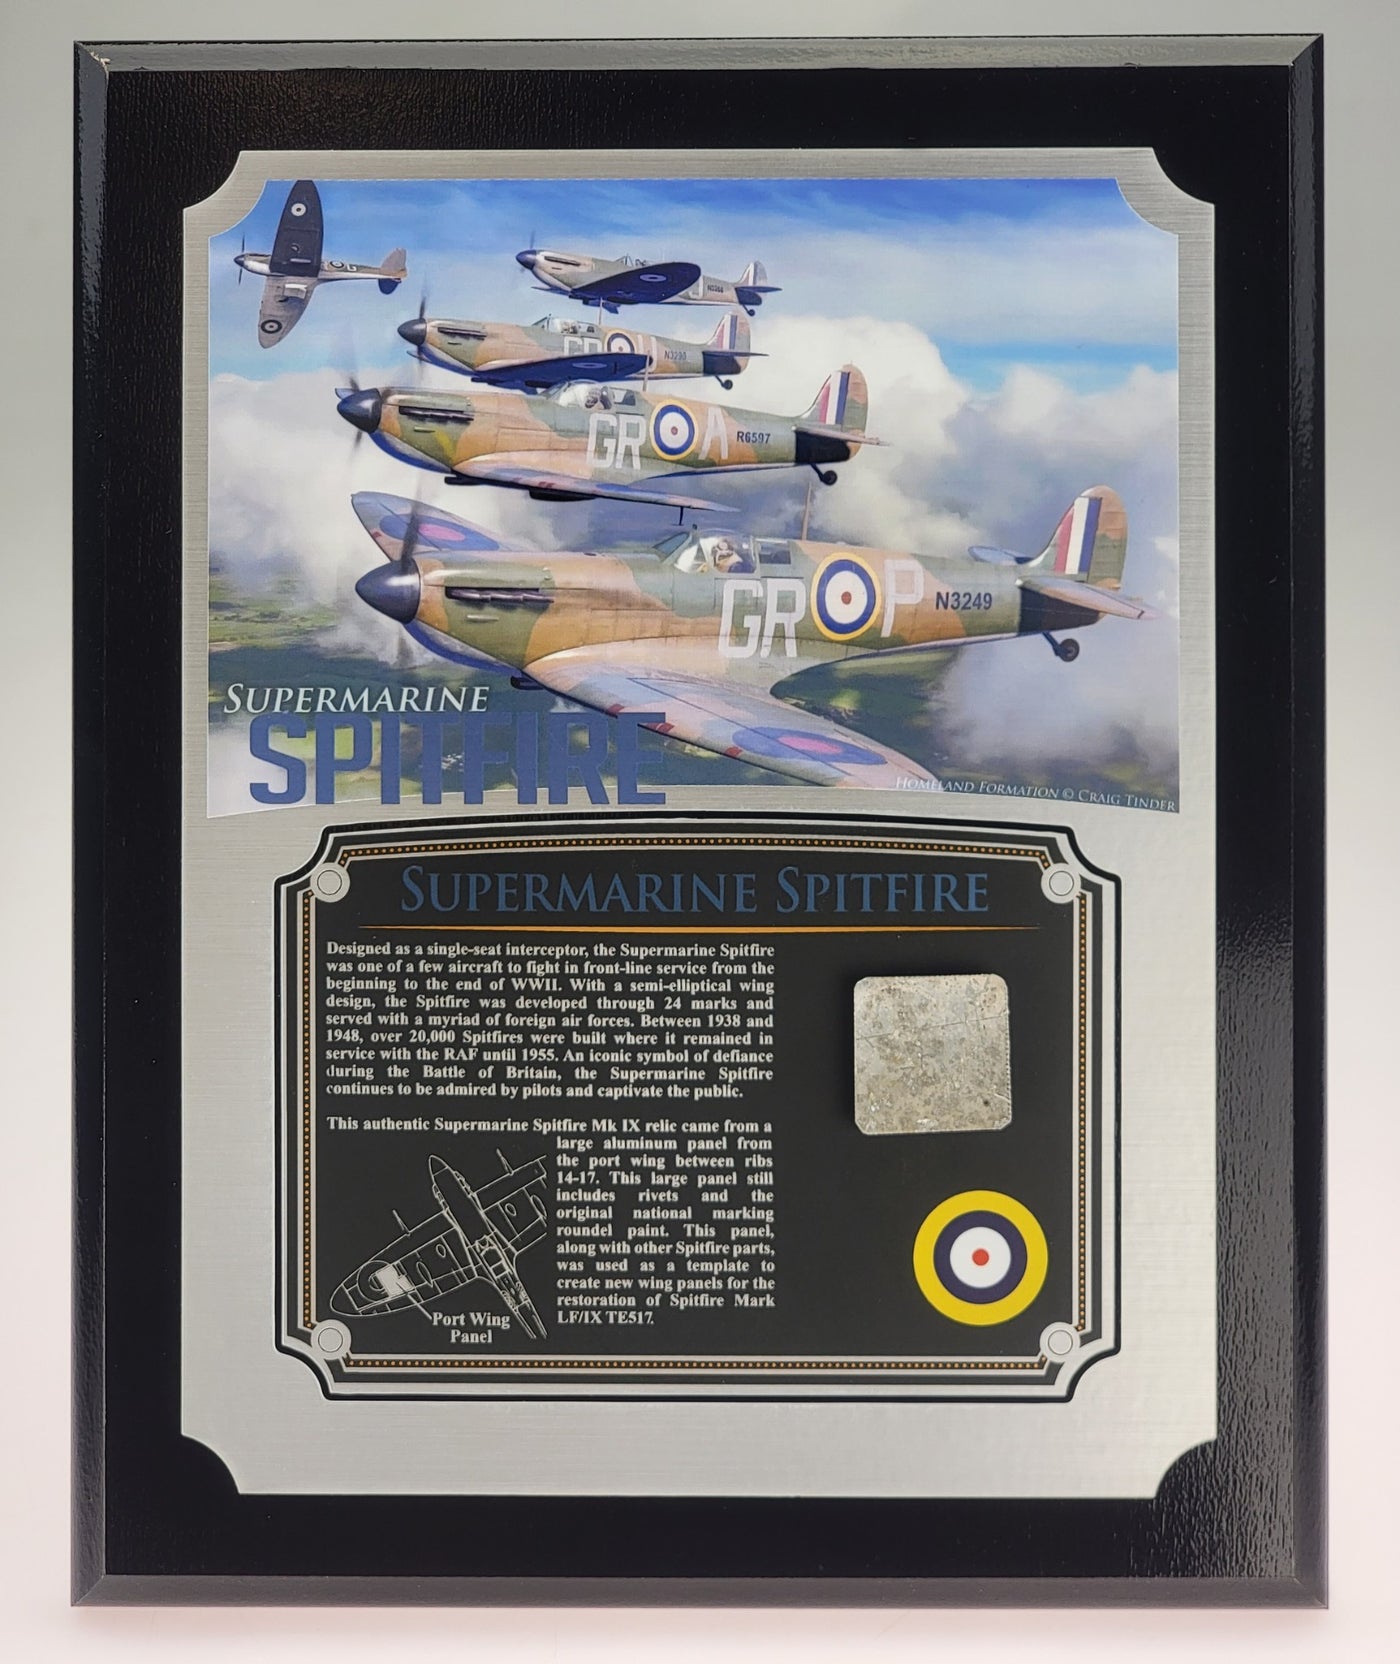 WWII Supermarine Spitfire Relic Plaque - Full Color 8"x10"-Historical Display Plaques-Aces In Action: The Workshop of Artist Craig Tinder